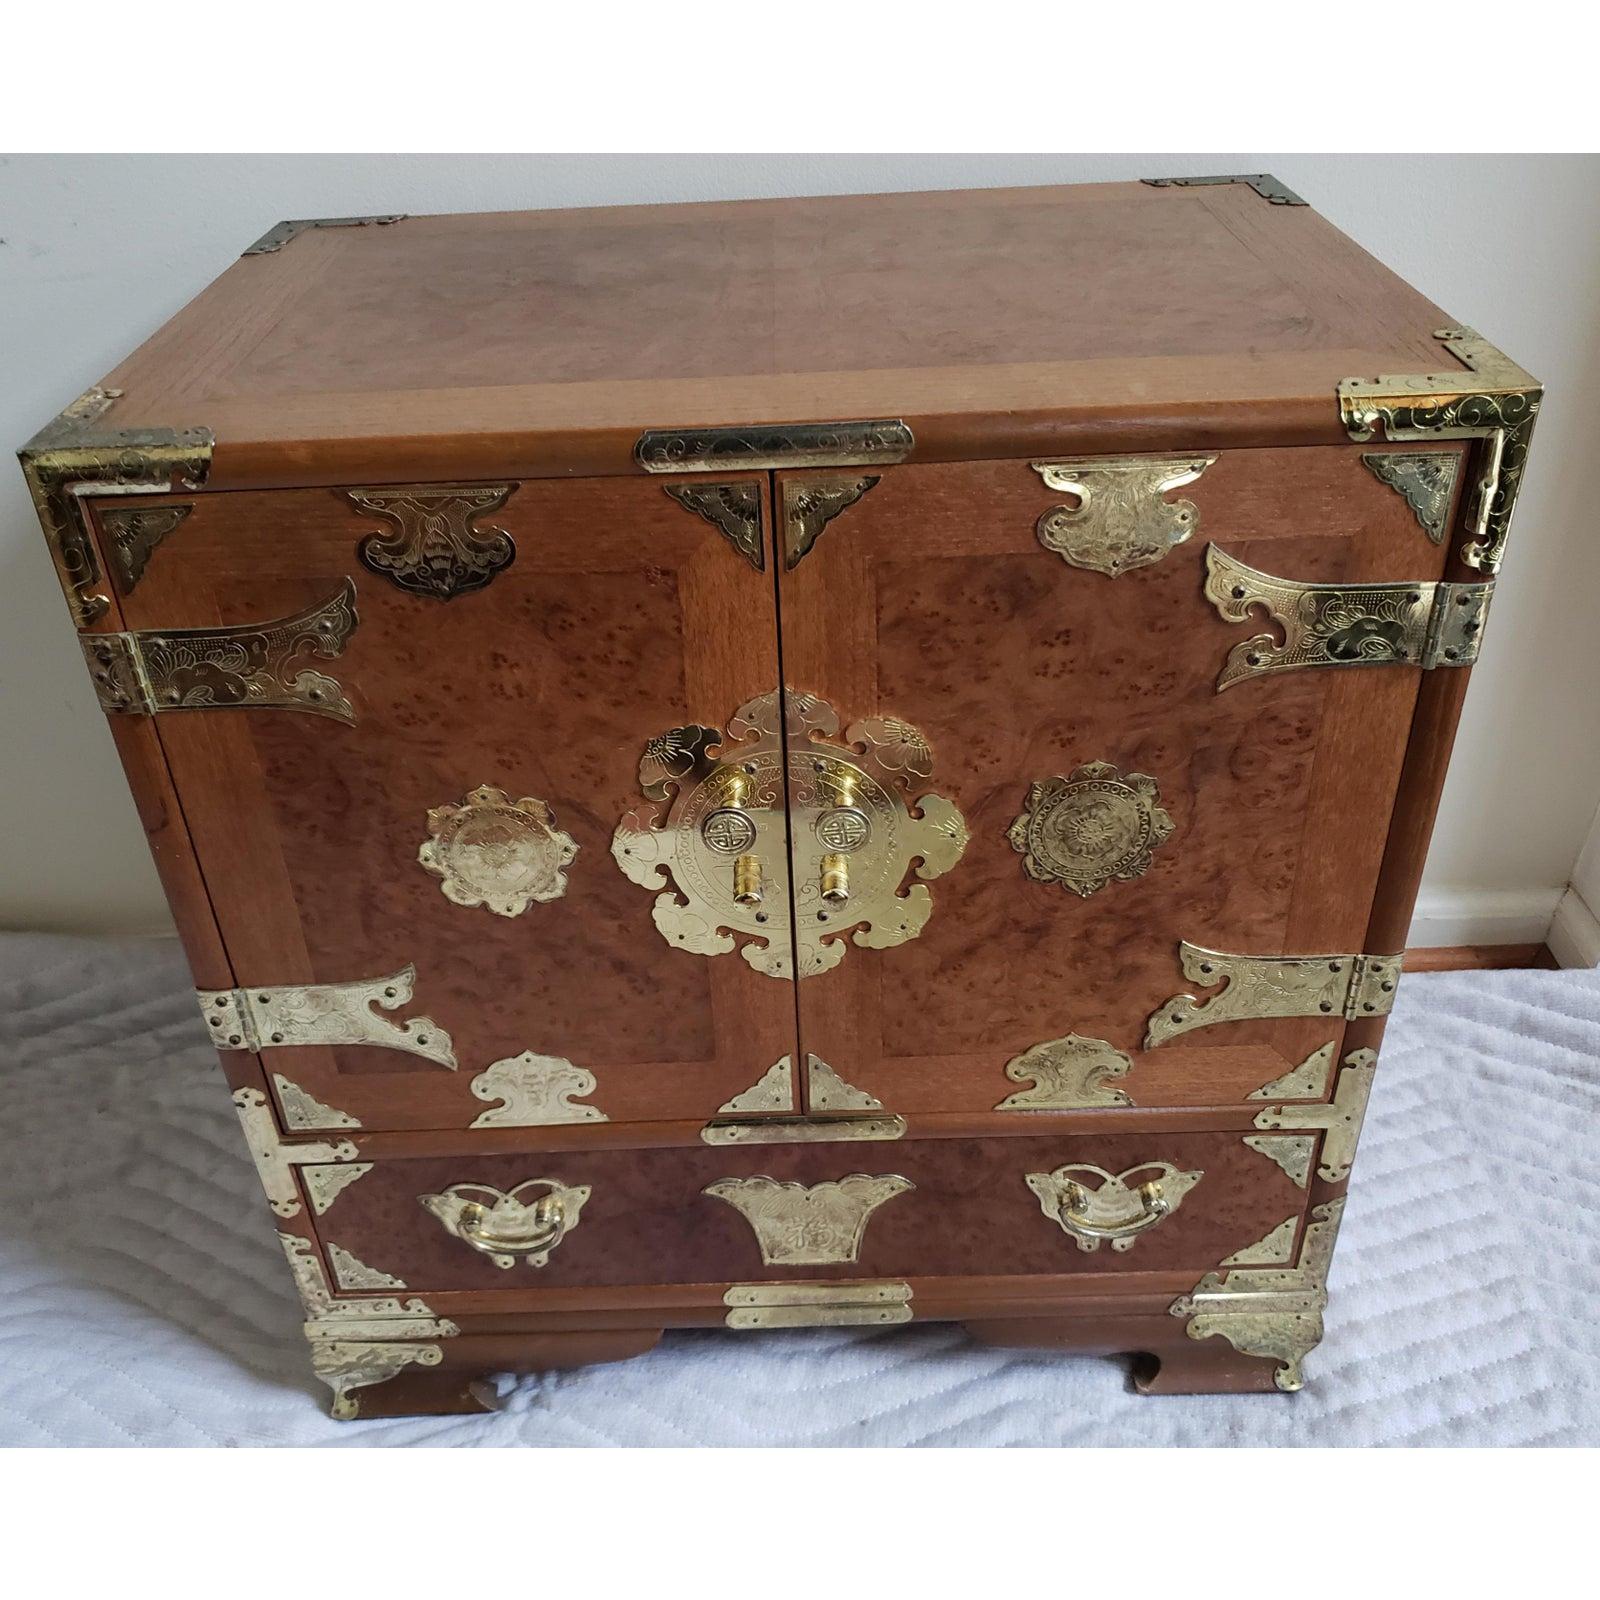 Asian Tansu style Mahohany and maple burl end table chest, jewelry chest. Practical and beautiful Japanese tansu style 4 drawer chest, nicely proportioned for a unique bedside lamp table, nightstand, or end table. Beautifully appointed with striking